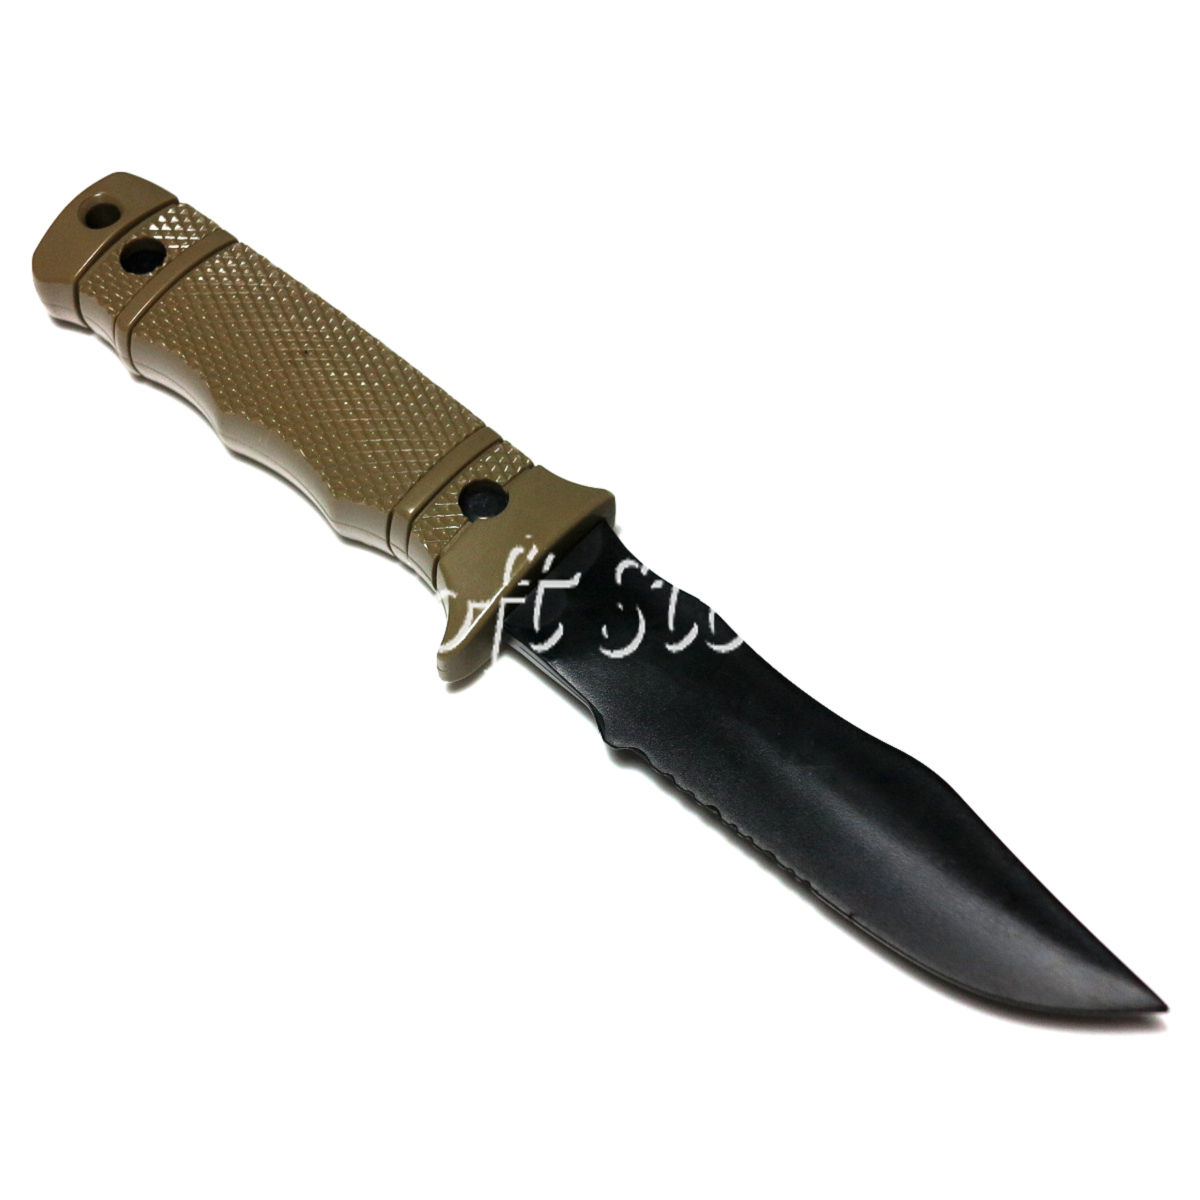 Airsoft Wargame Combat Gear CYMA Dummy Plastic M37 Seal Pup Knife with Sheath Tan (HY-016) - Click Image to Close